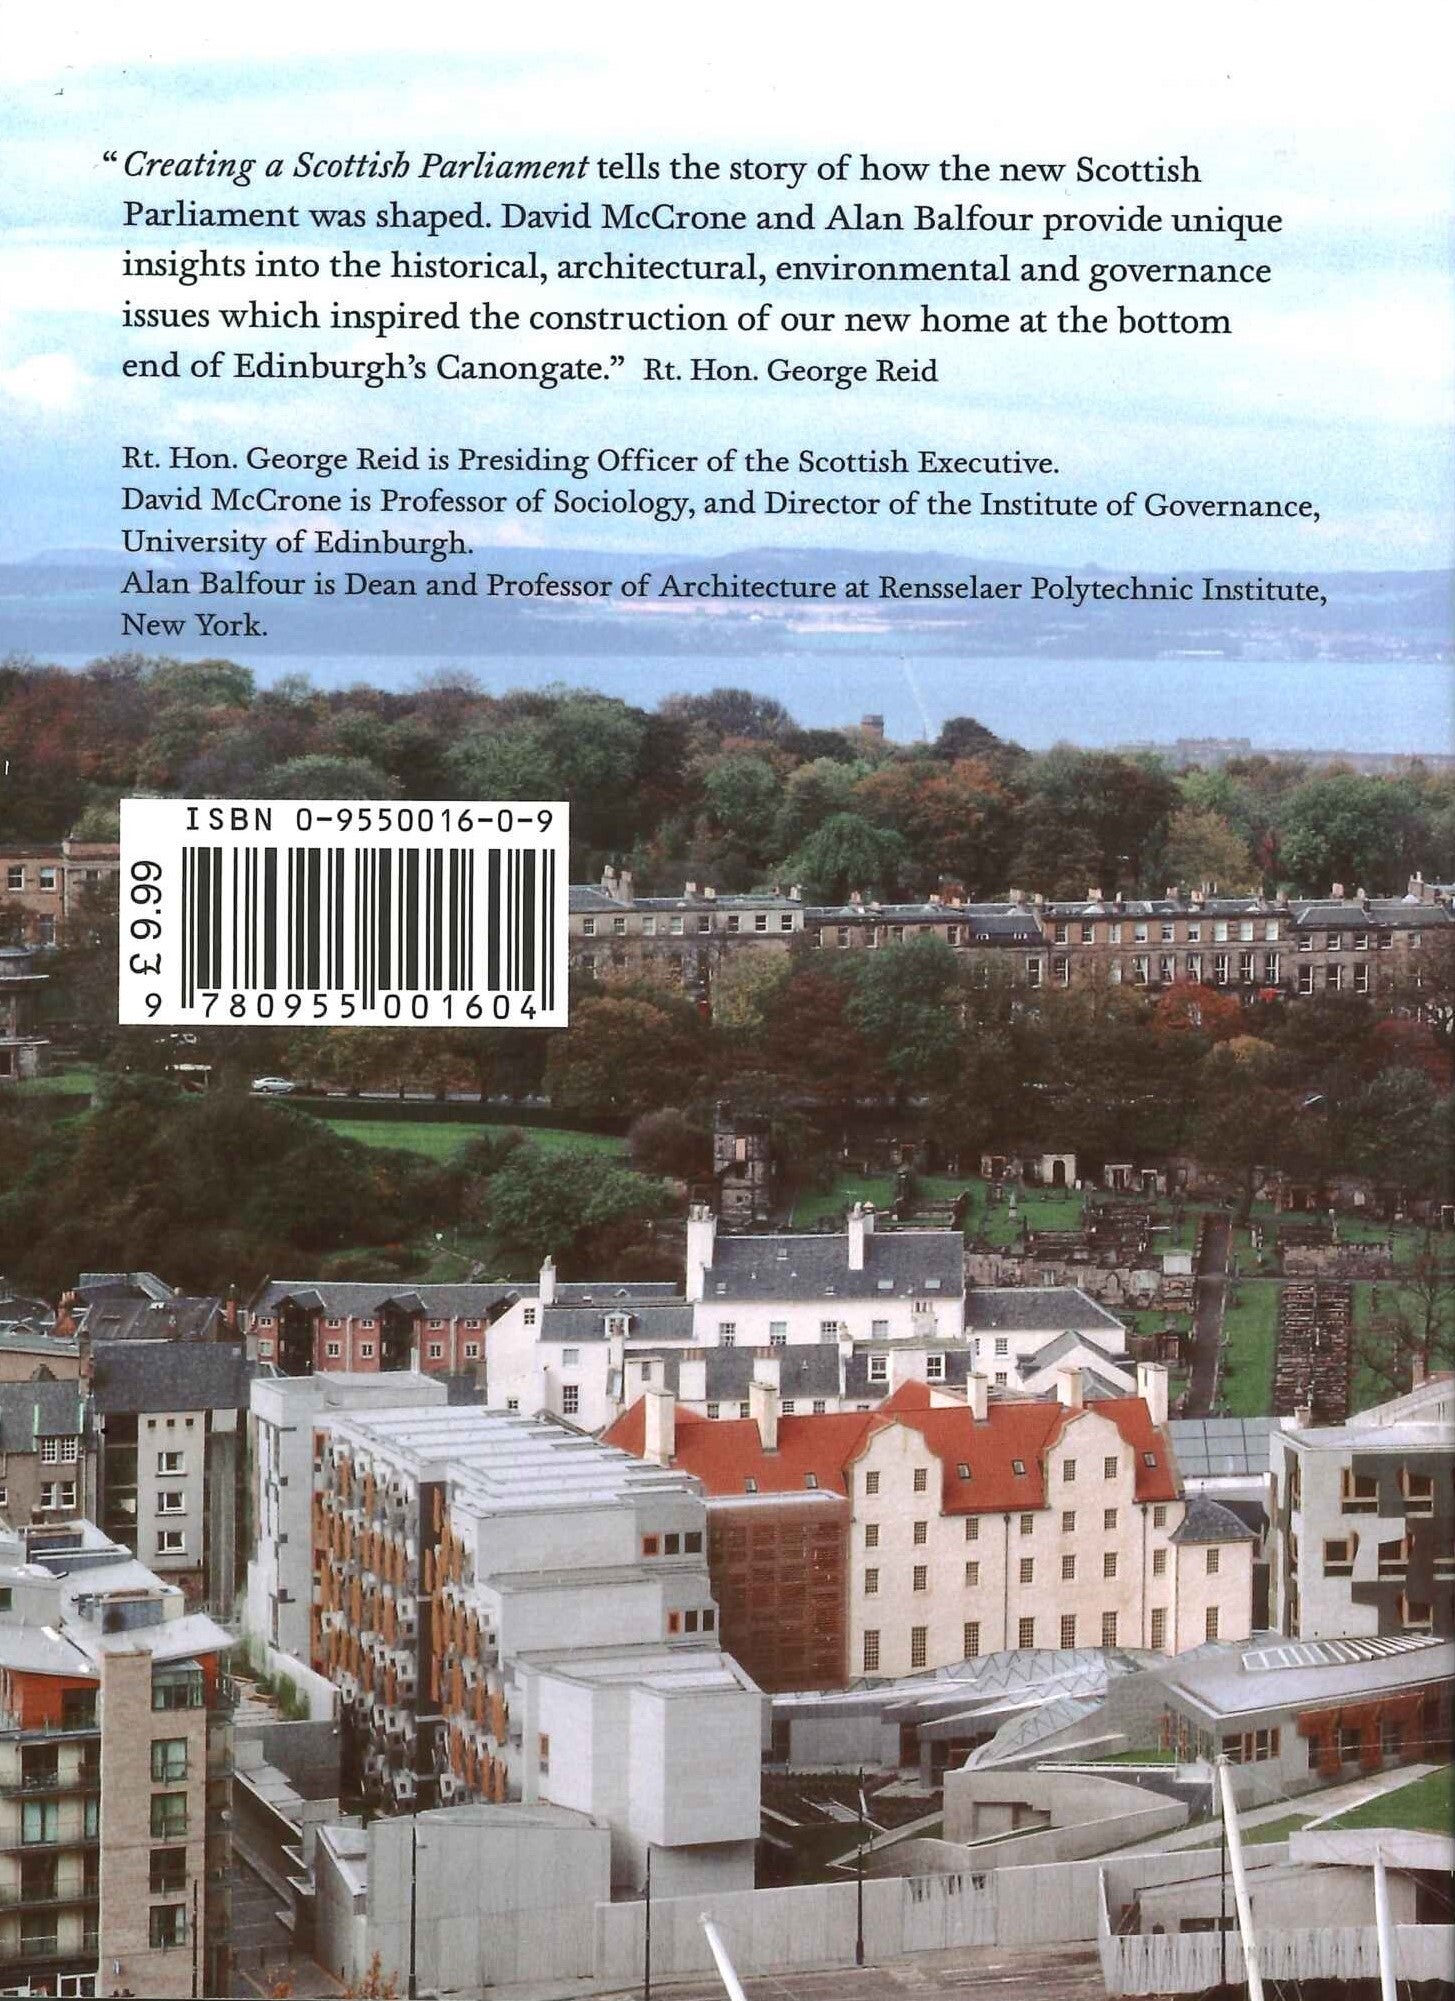 The back cover of the book with text.